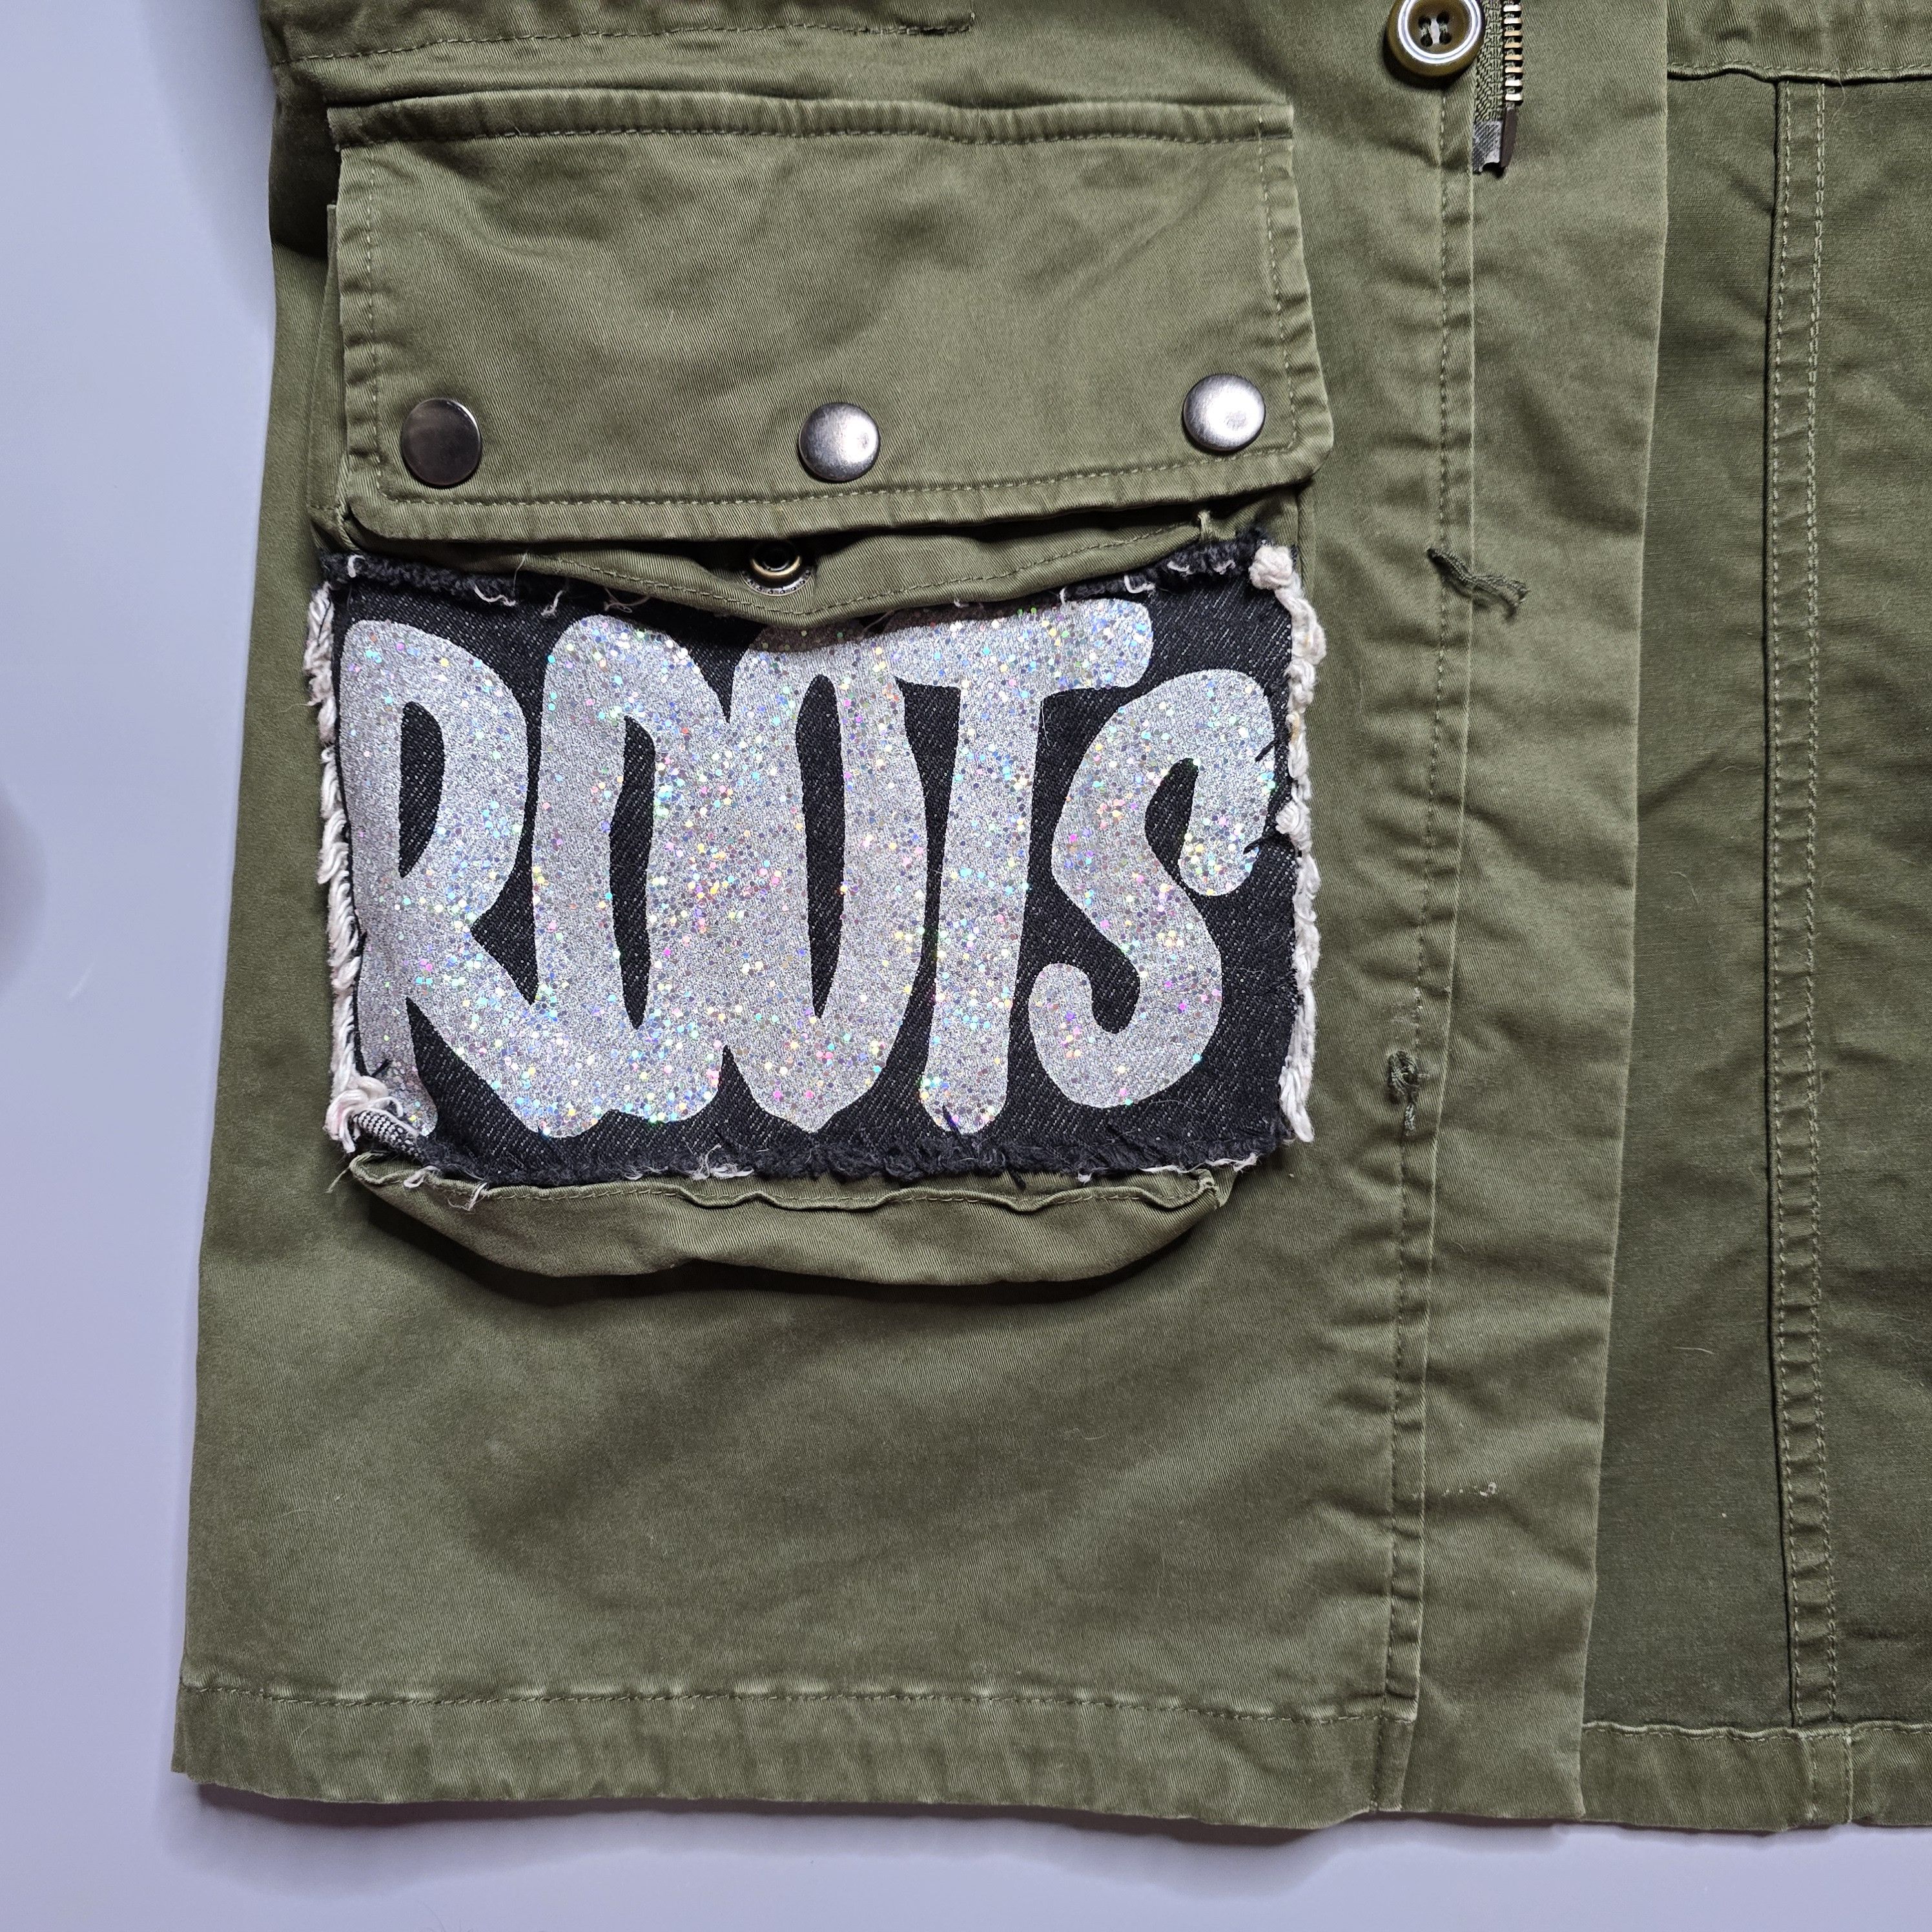 Faith Connexion - Hand-Painted Crown Tag M65 Field Jacket - 10